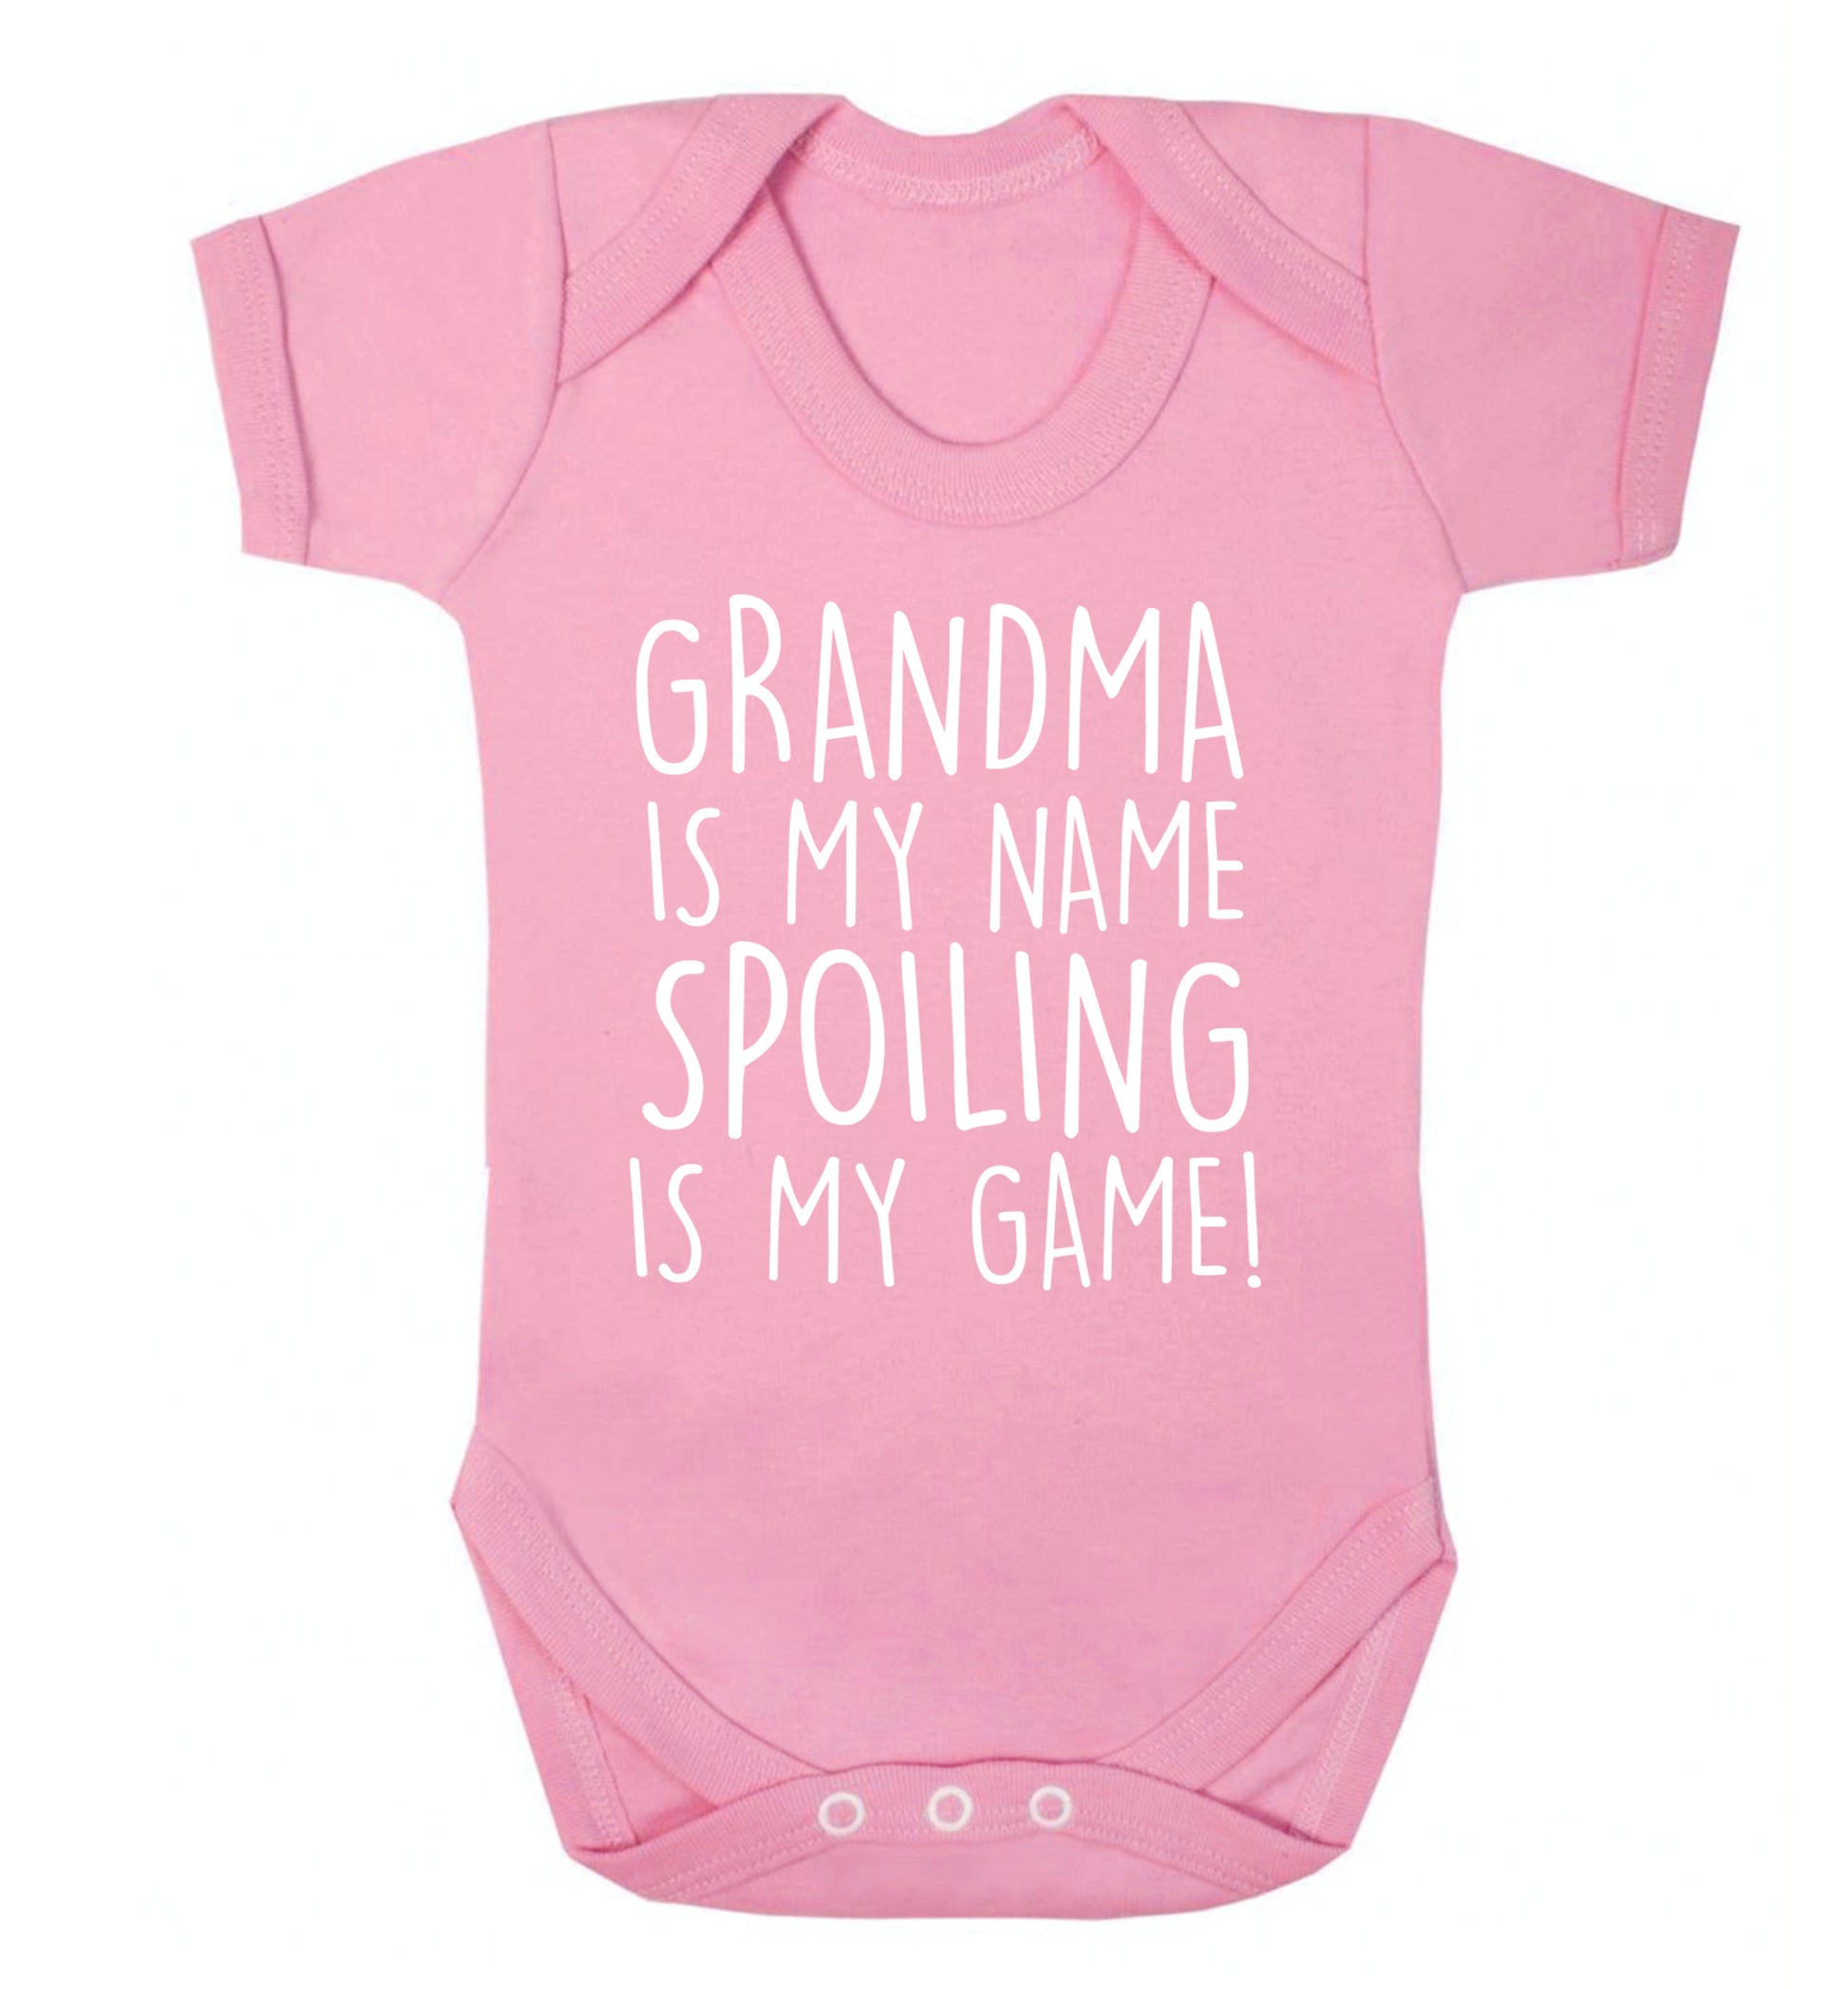 Grandma is my name, spoiling is my game Baby Vest pale pink 18-24 months